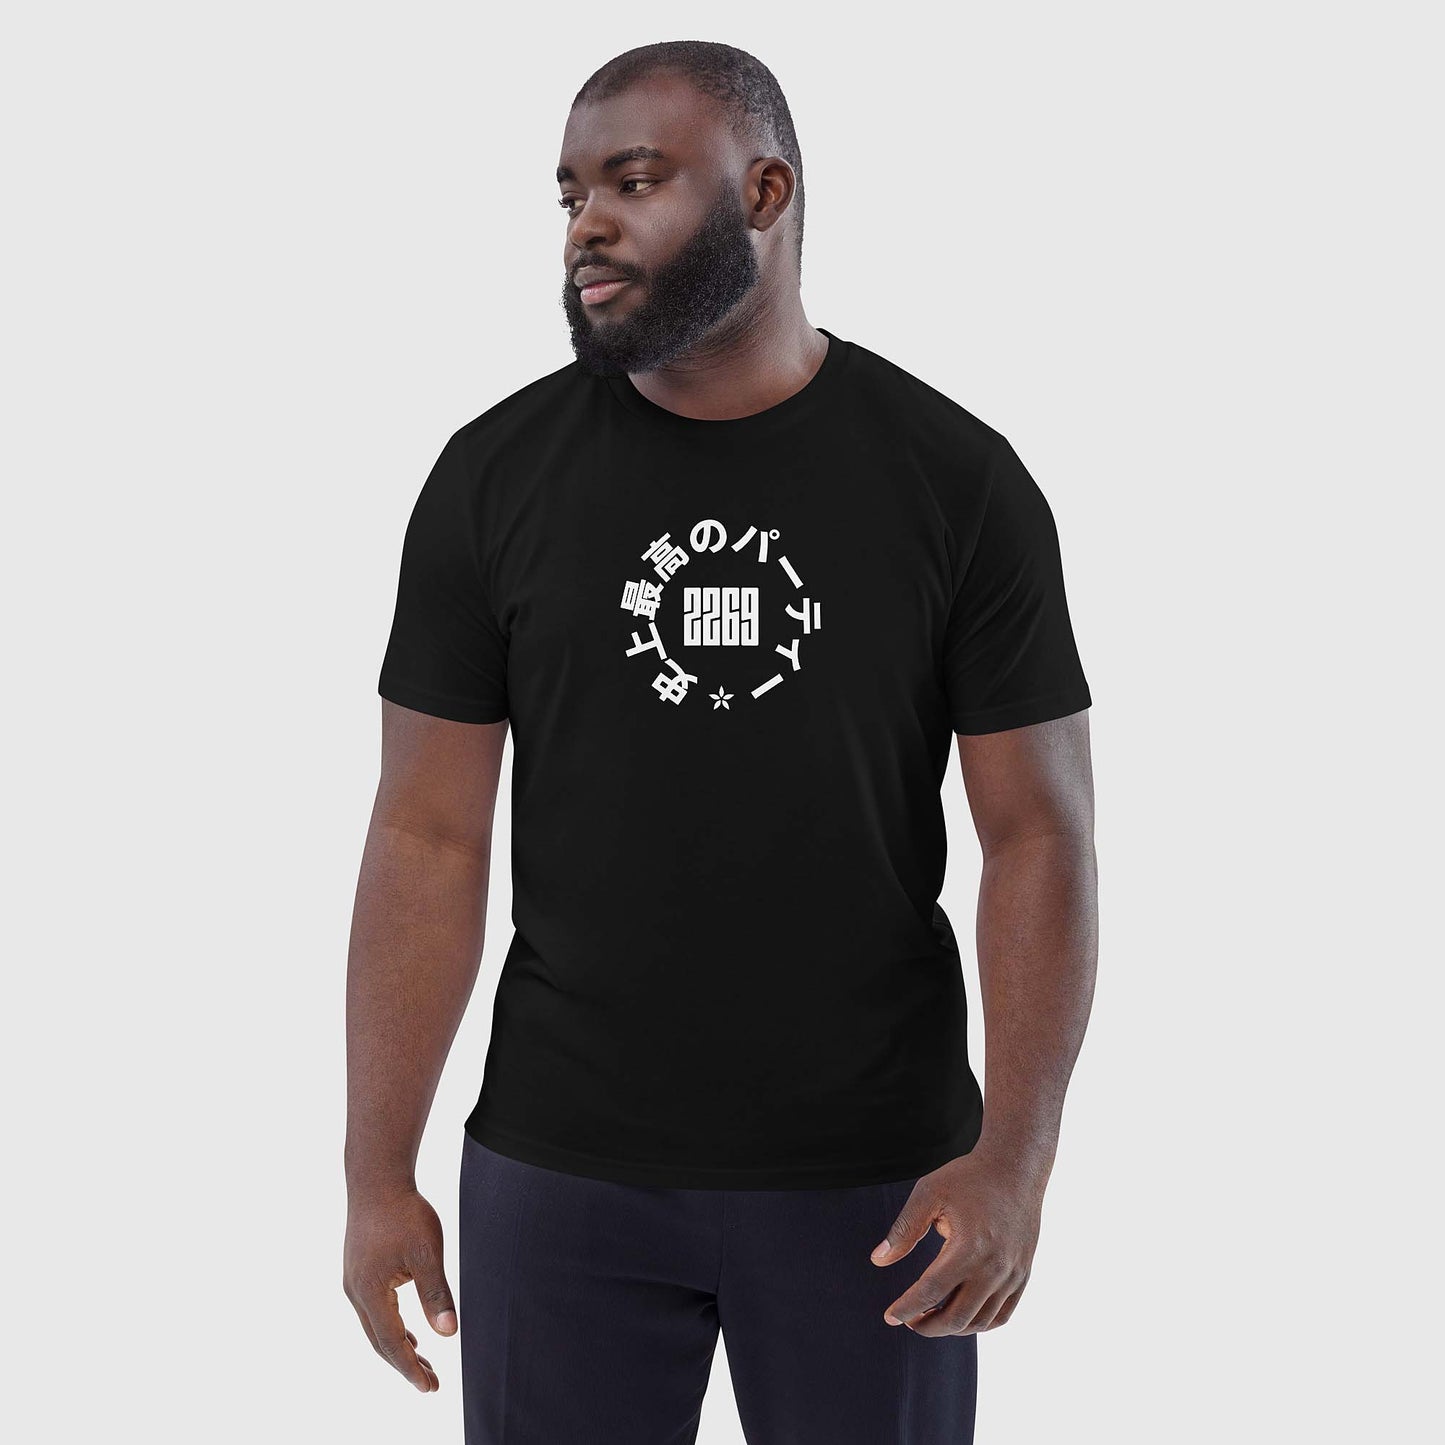 Men's black organic cotton t-shirt with Japanese 2269 party circle